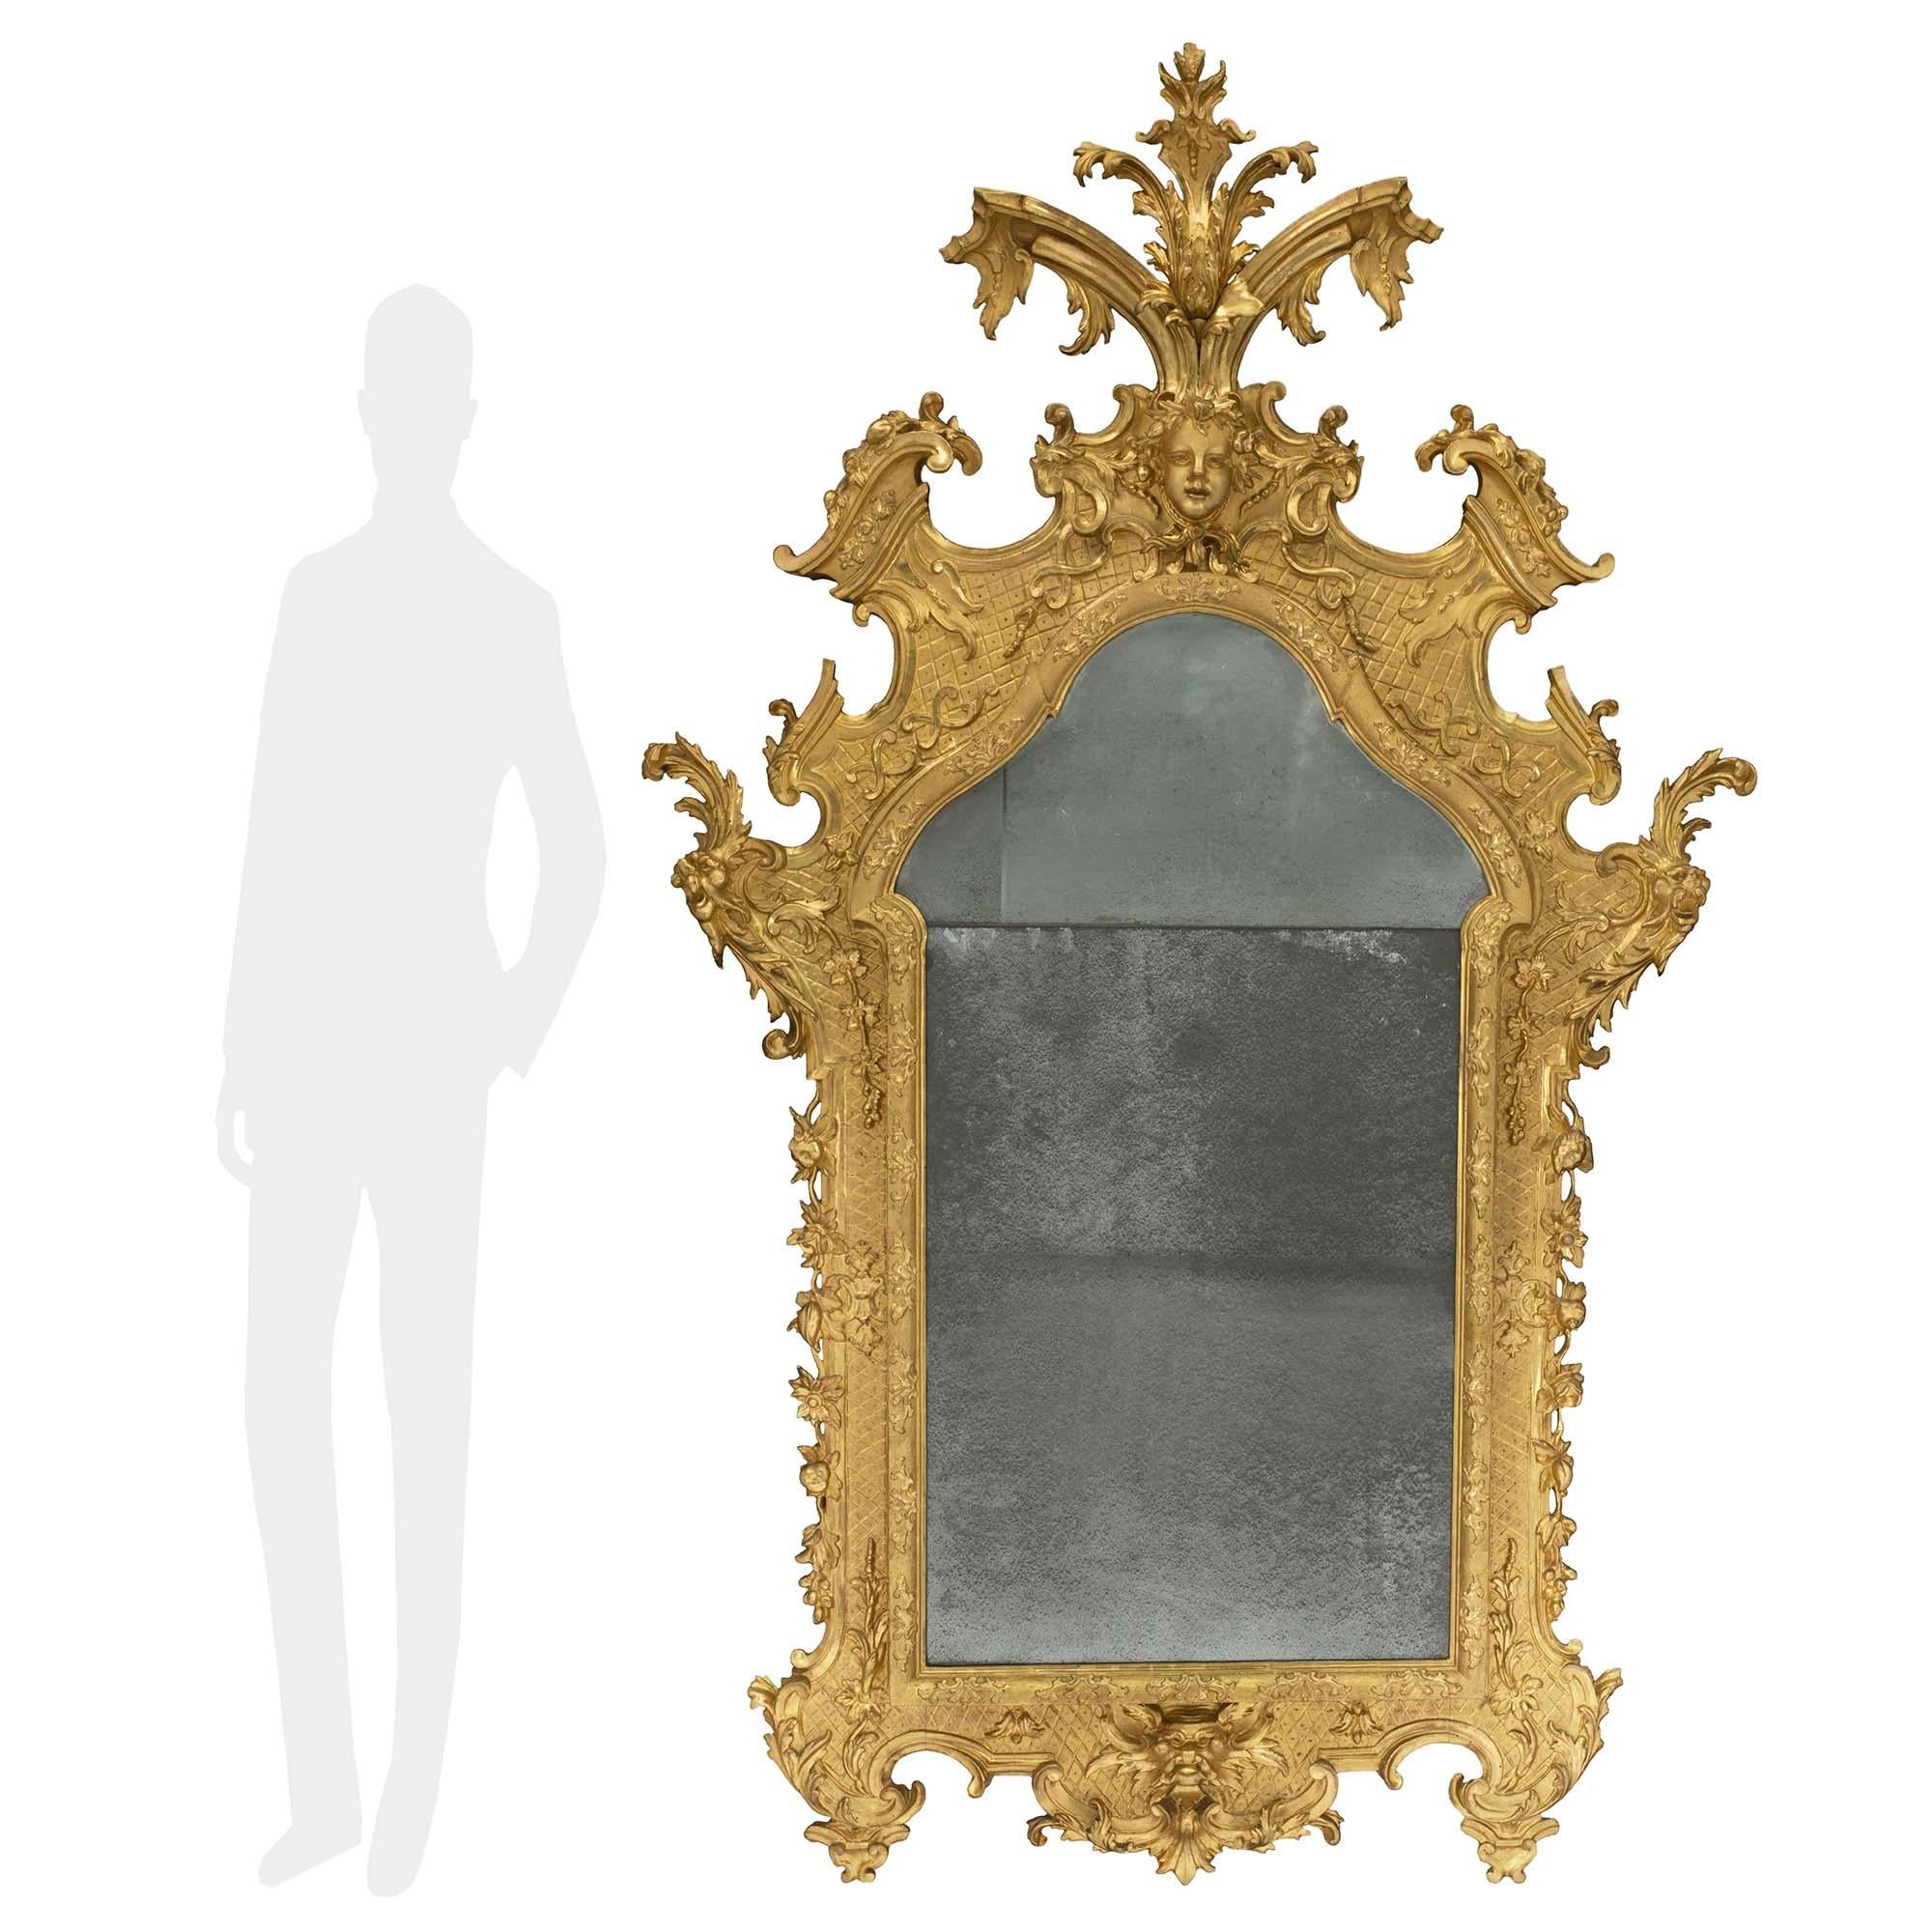 A stunning and large scale Italian 18th century Baroque period giltwood mirror. The original mirror plates are framed within a foliate and hammered designed mottled border. At the base are foliate feet with rich scrolled patterns which center a